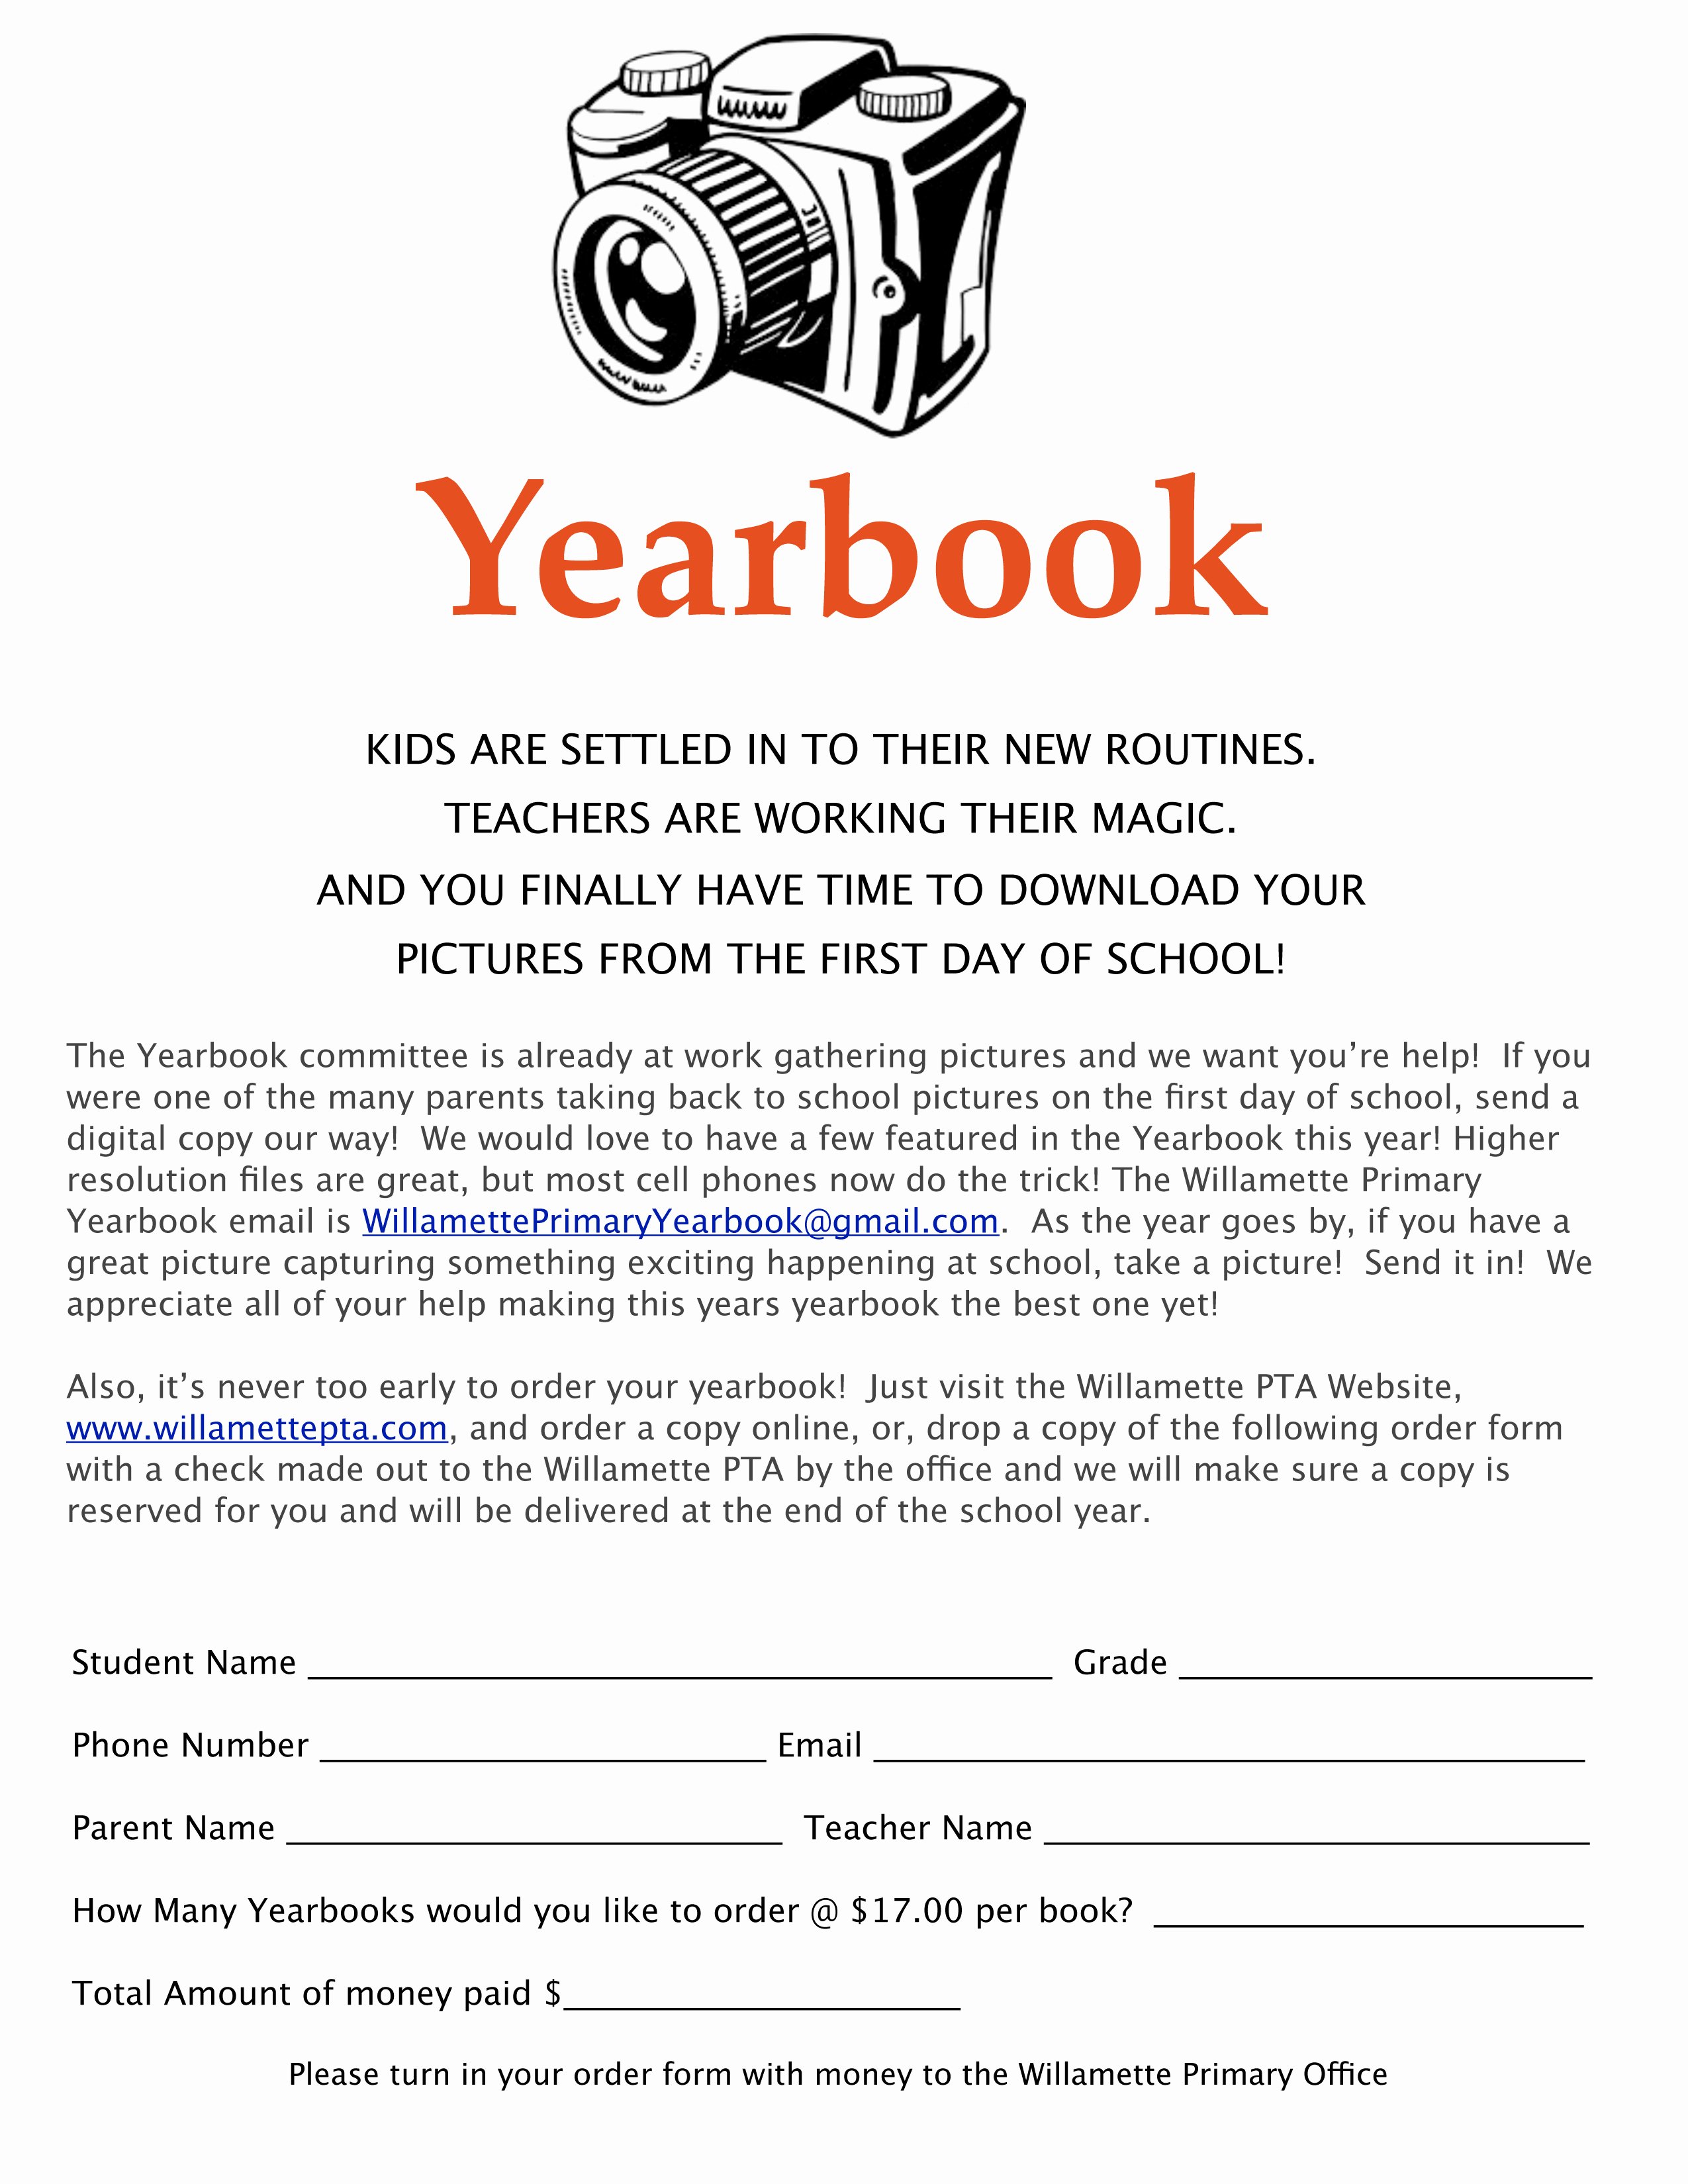 Yearbook order form Template Lovely 28 Of Yearbook Template for Word